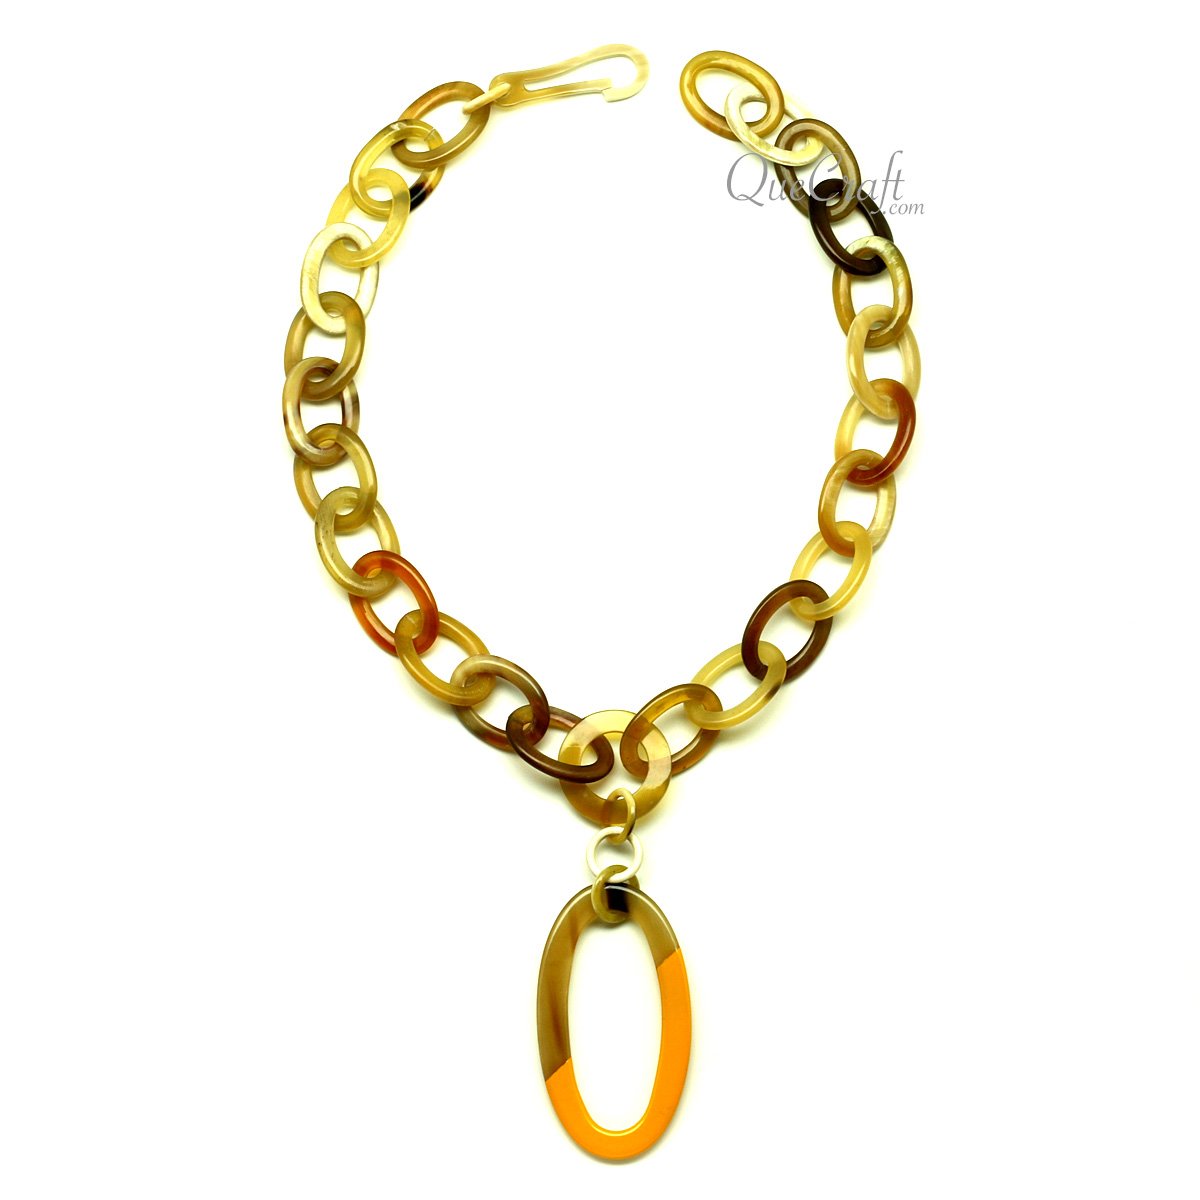 Horn & Lacquer Chain Necklace #13059 - HORN JEWELRY